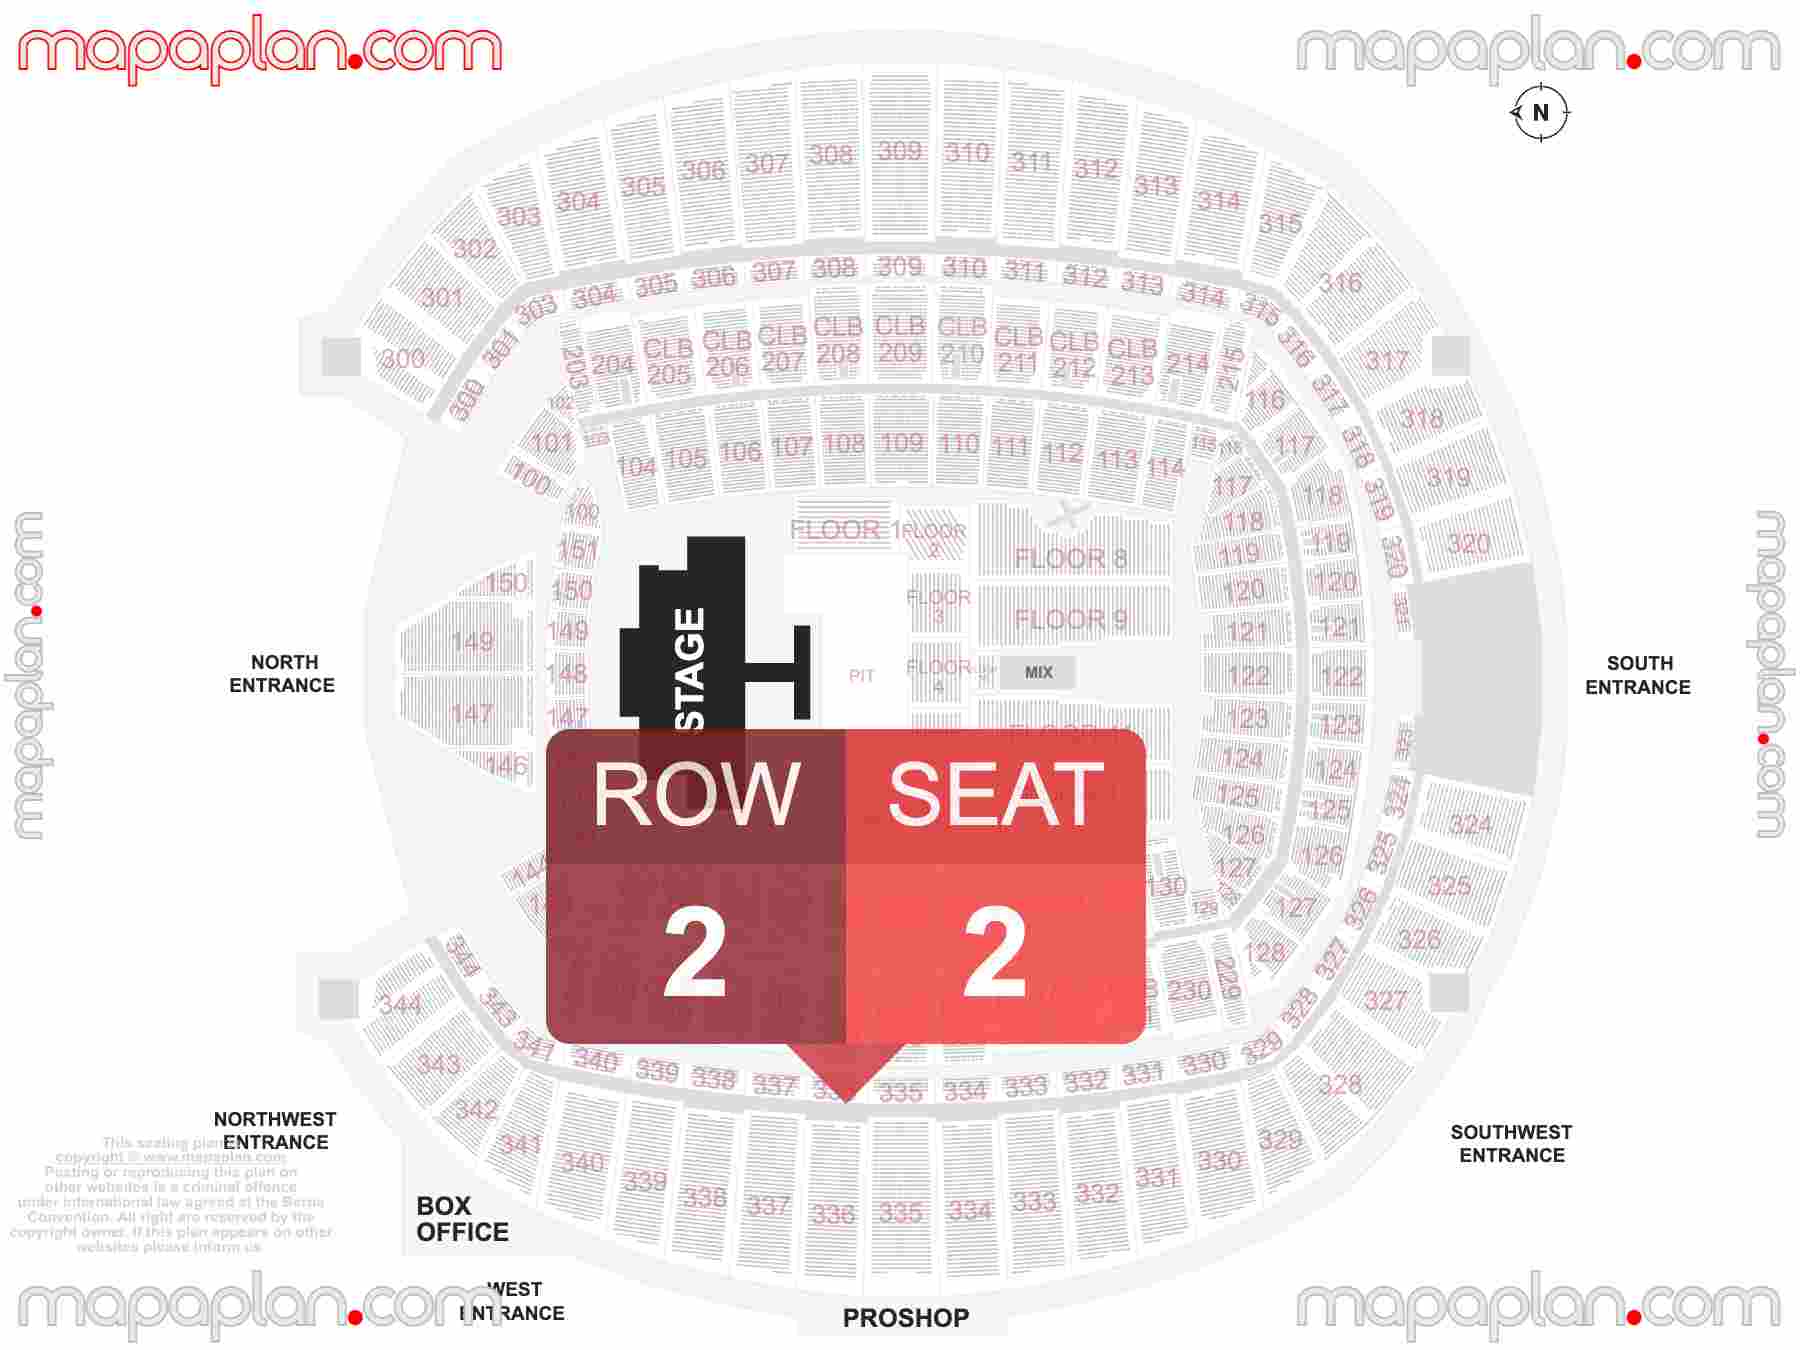 Seattle Lumen Field seating chart Concert with extended catwalk runway B-stage and floor PIT general admission standing find best seats row numbering system plan showing how many seats per row - Individual 'find my seat' virtual locator